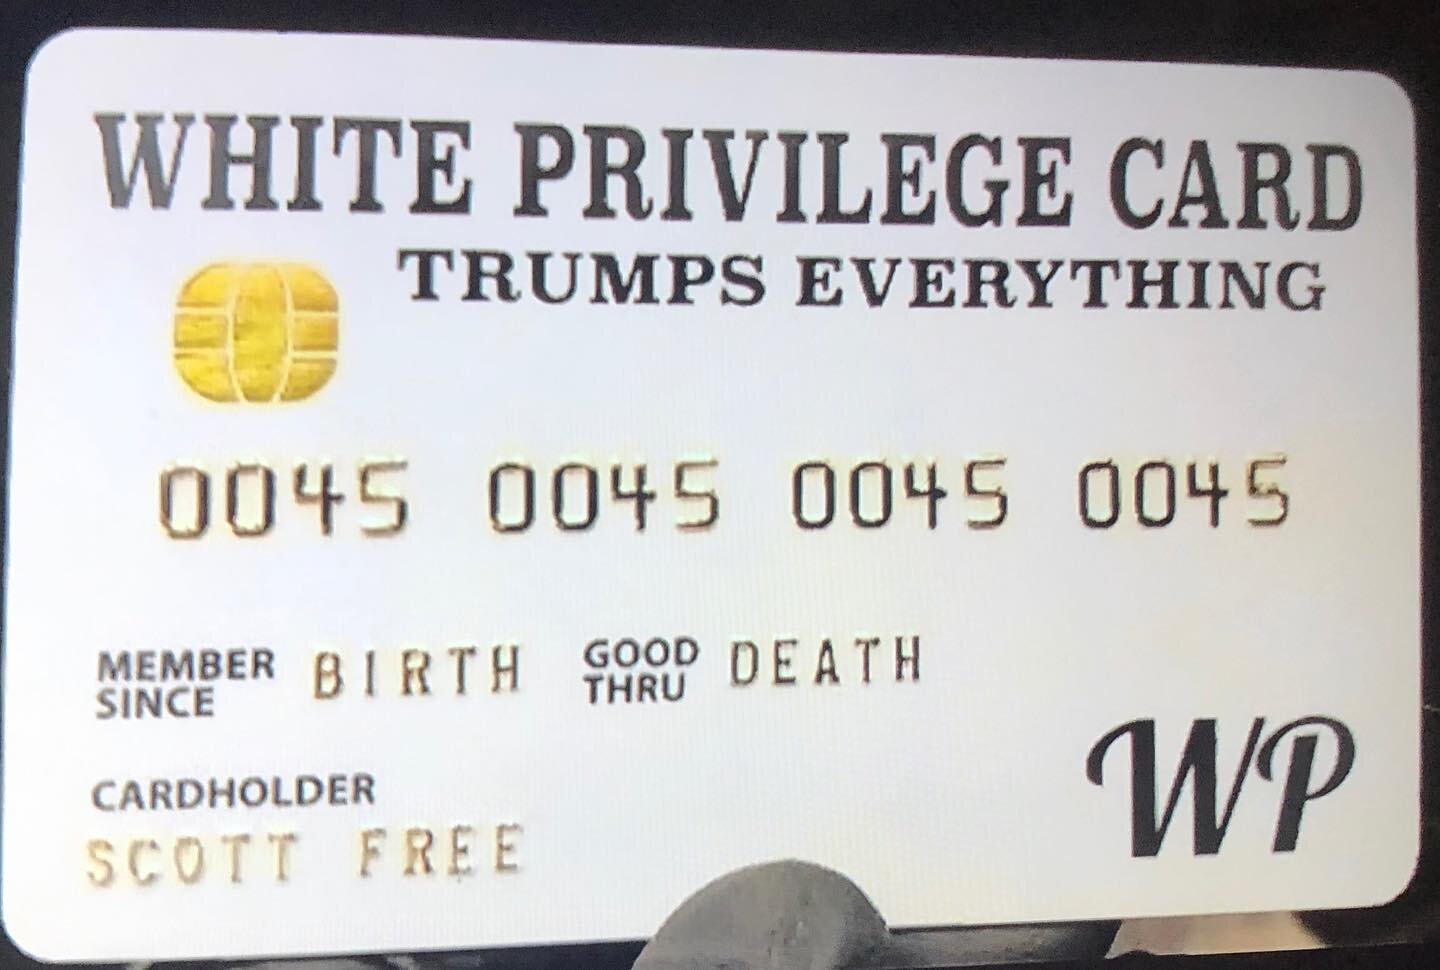 Soooo, I wonder if Dude arrested for making pipe bombs, threats and and caught with weapons can use his &lsquo;White Privilege Card&rsquo; to post his Five Million dollar bail? 😂